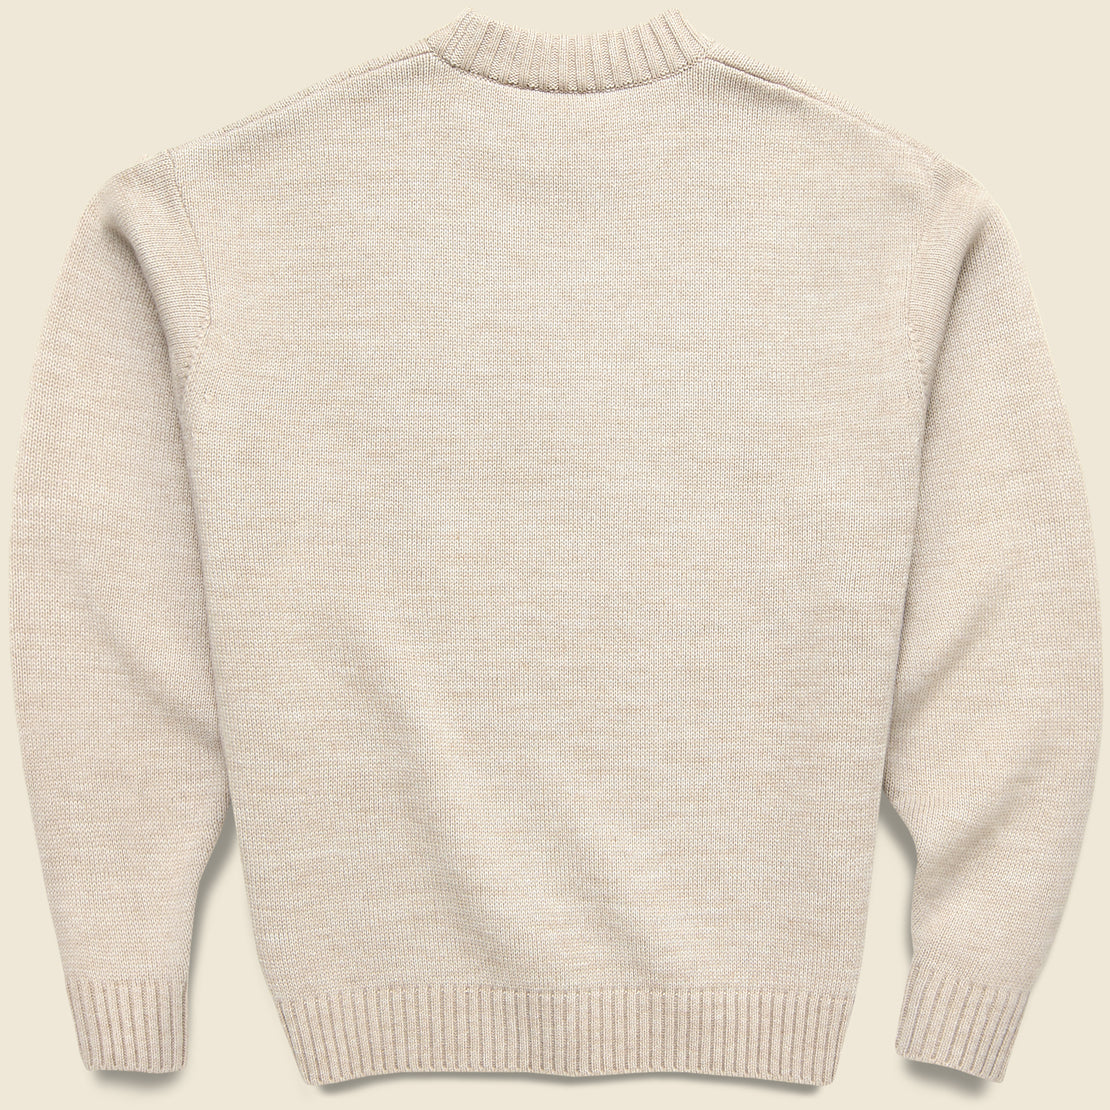 7G Wool Crew Sweater (CONEYBOWY) - Beige - Kapital - STAG Provisions - Tops - Sweater